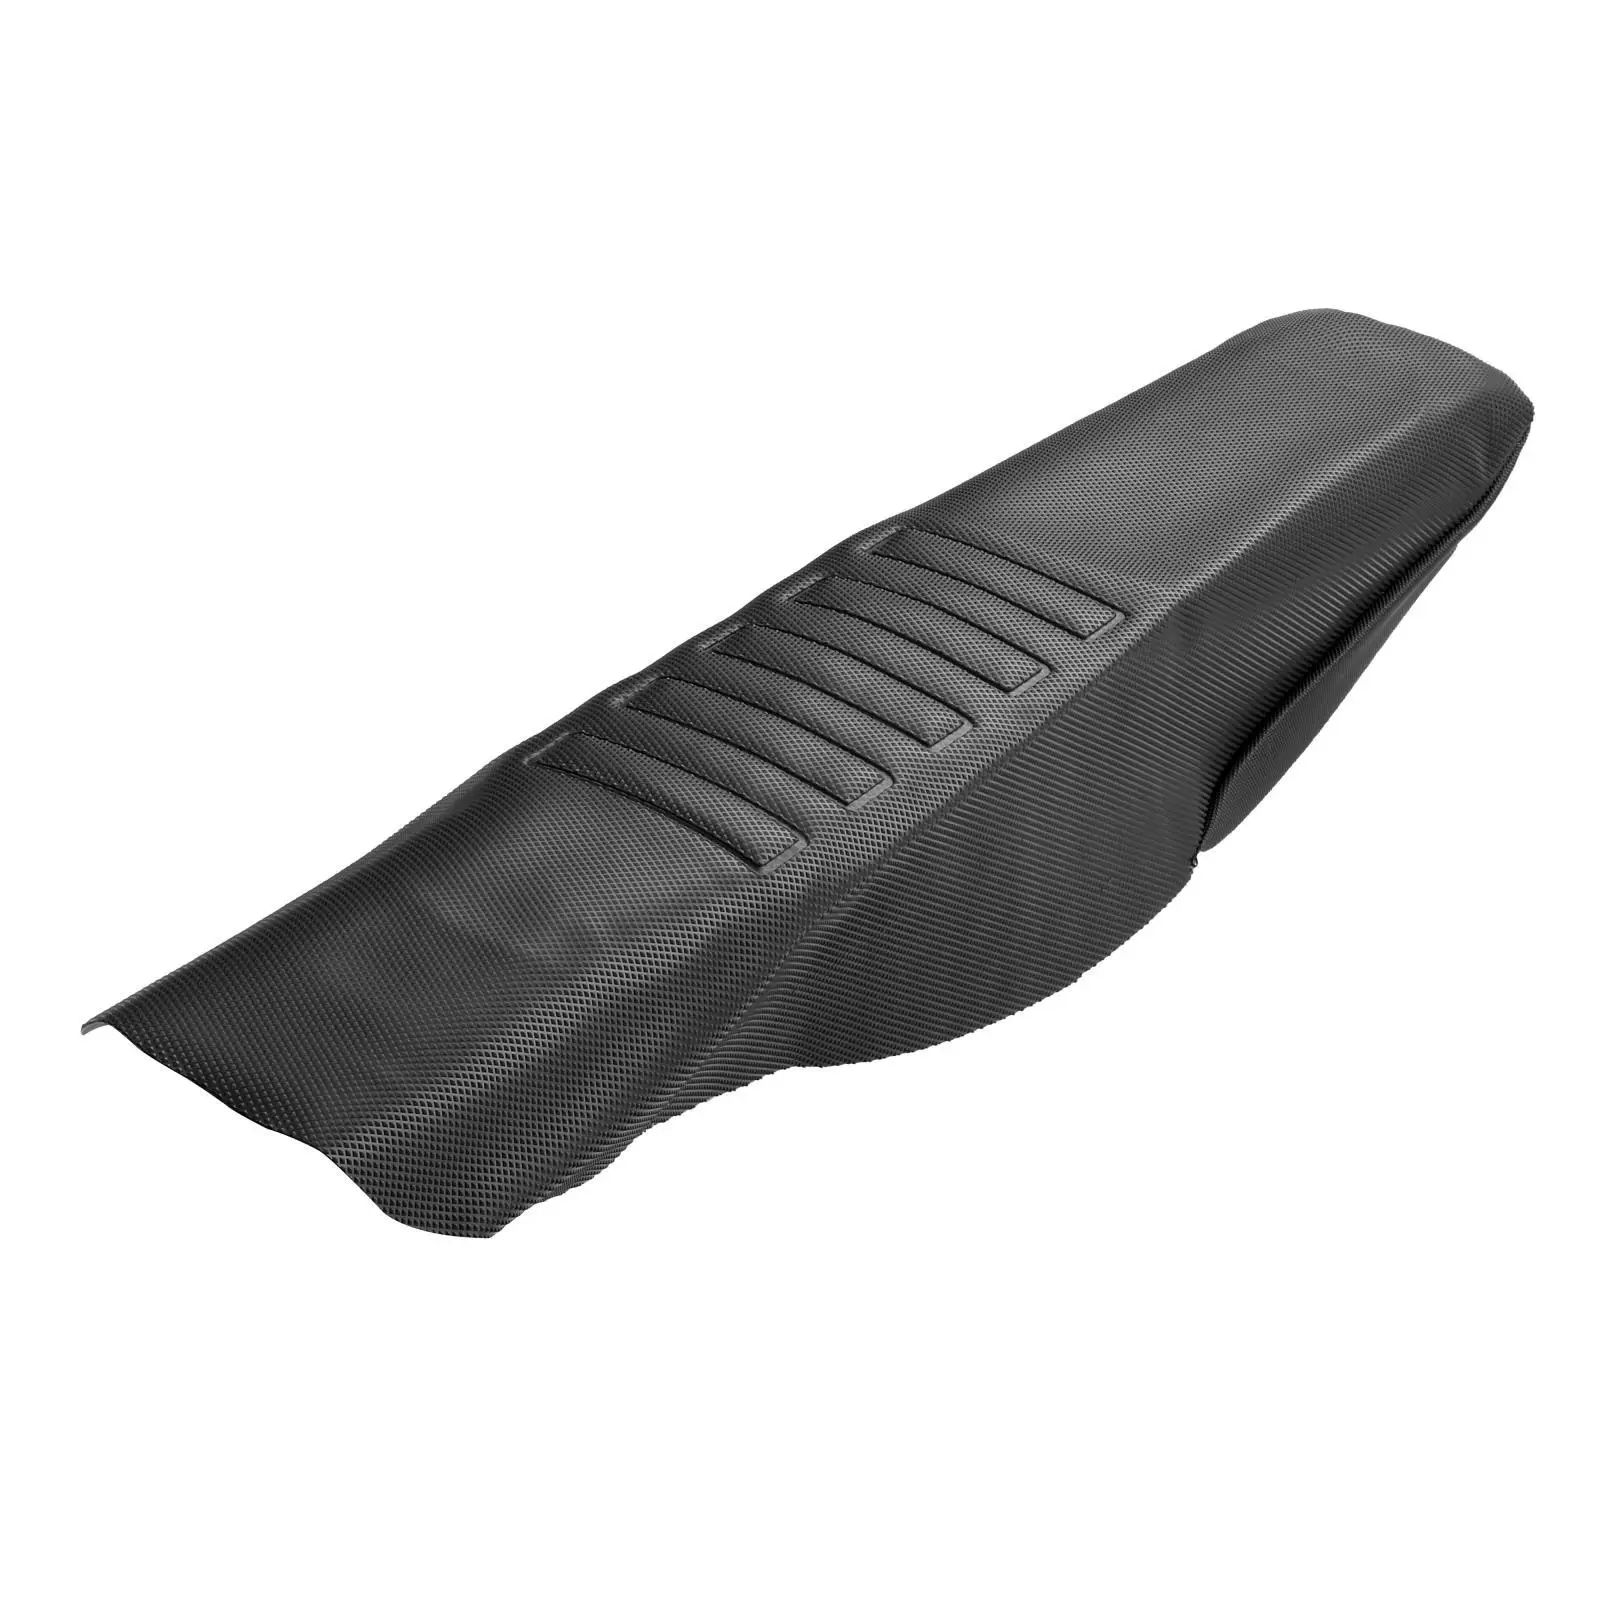 Motorcycle Seat Cushion Decoration EVA Material Non-Slip Accessories Fits for Crf